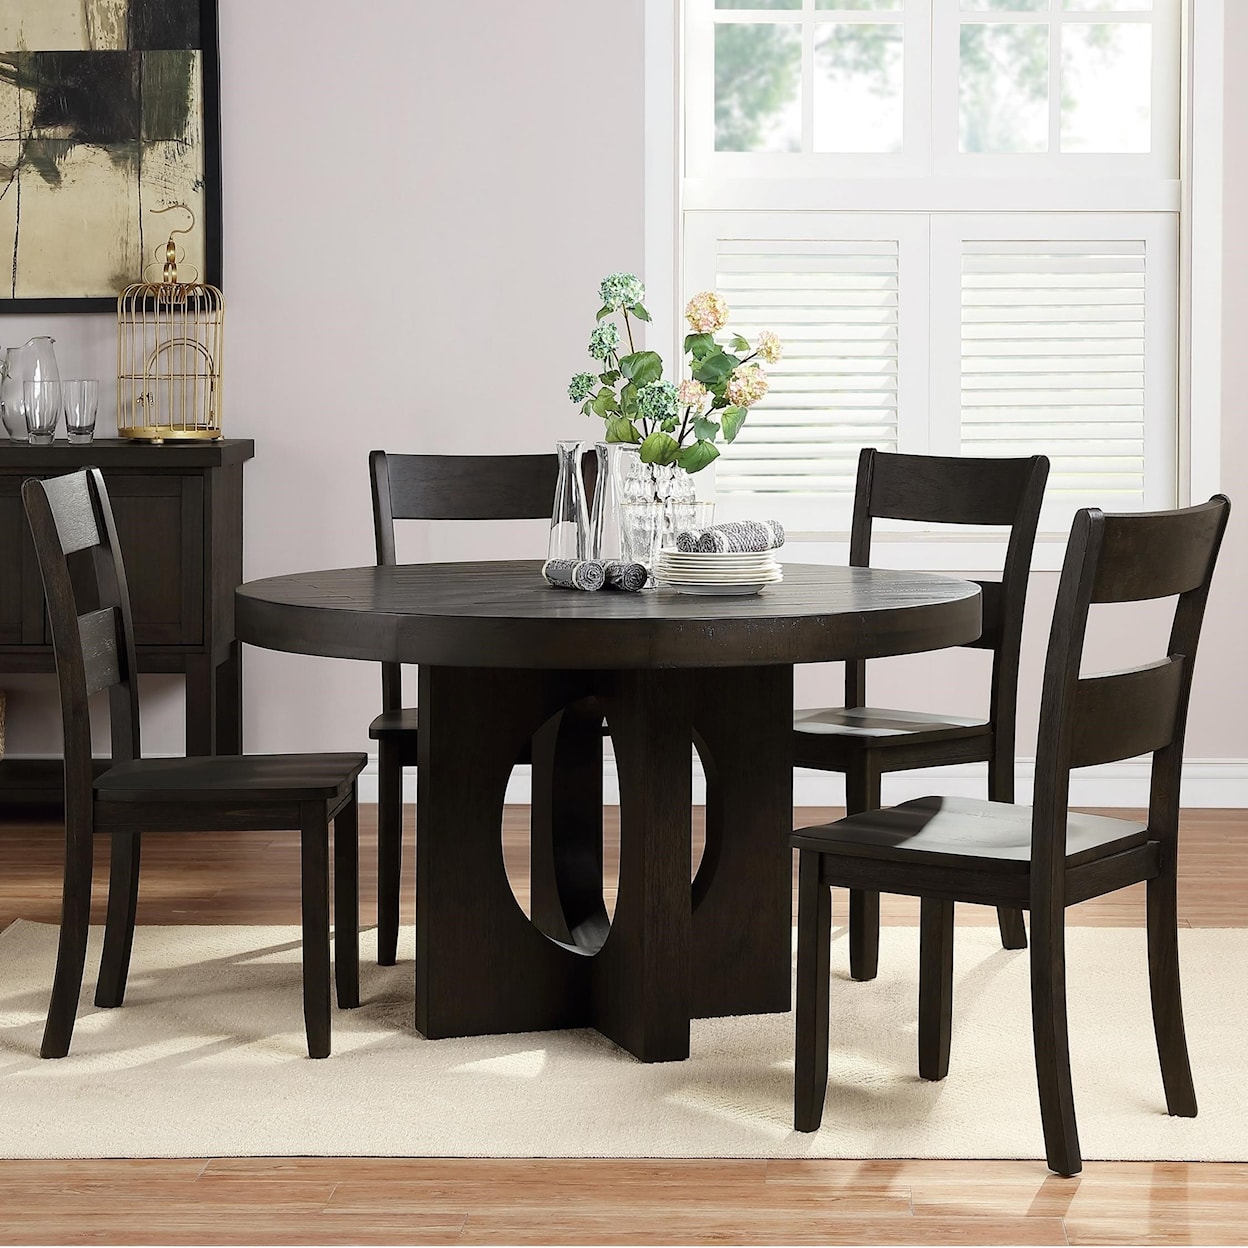 Acme Furniture Haddie 5-Piece Table and Chair Set